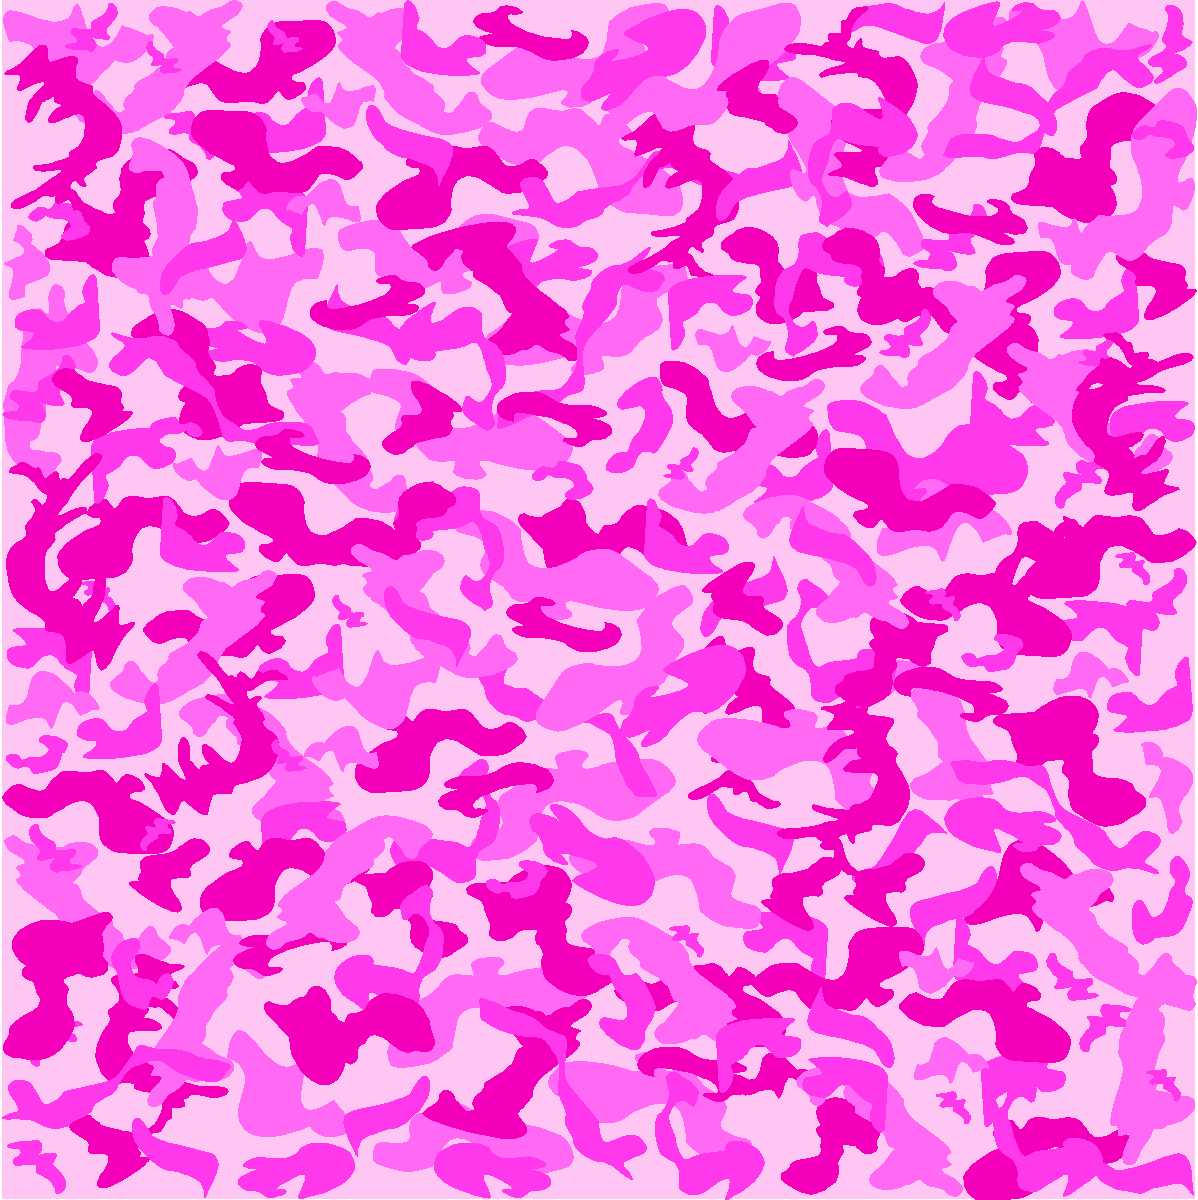 camo-pink-urban-micro.jpg (1198×1200) (With images) | Pink camouflage ...